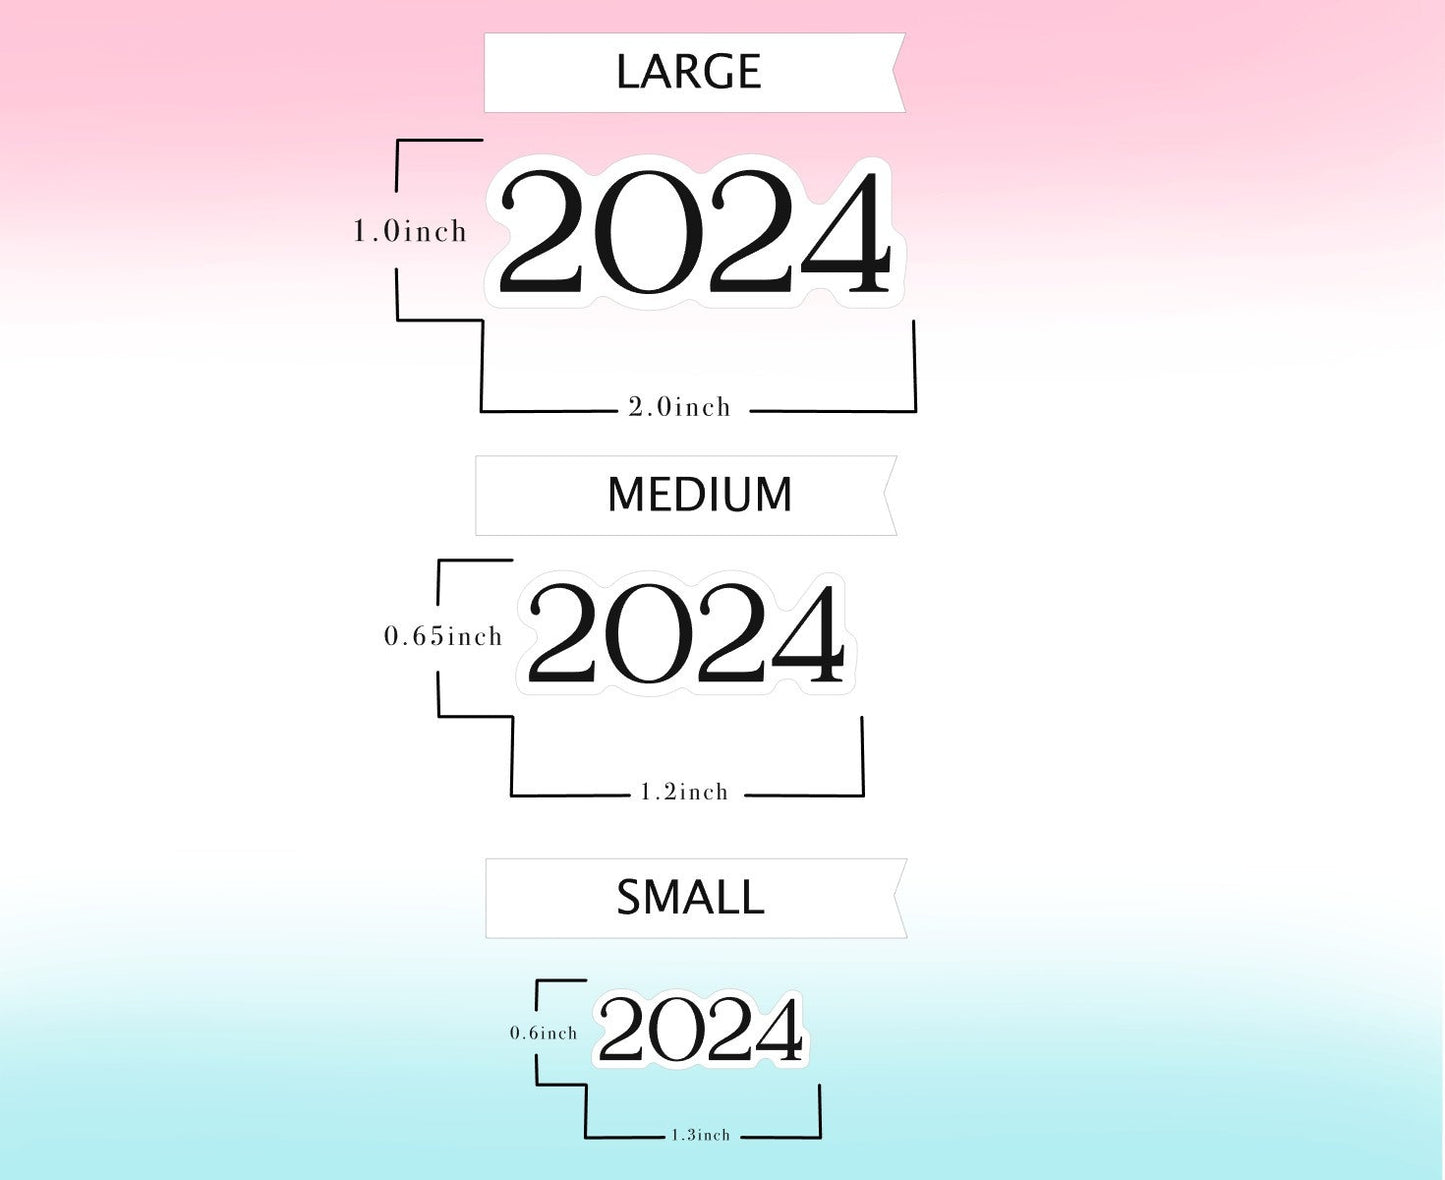 2024 STICKERS || Script, Print, Planner Stickers for Calendars, Journals, Notebooks, and More